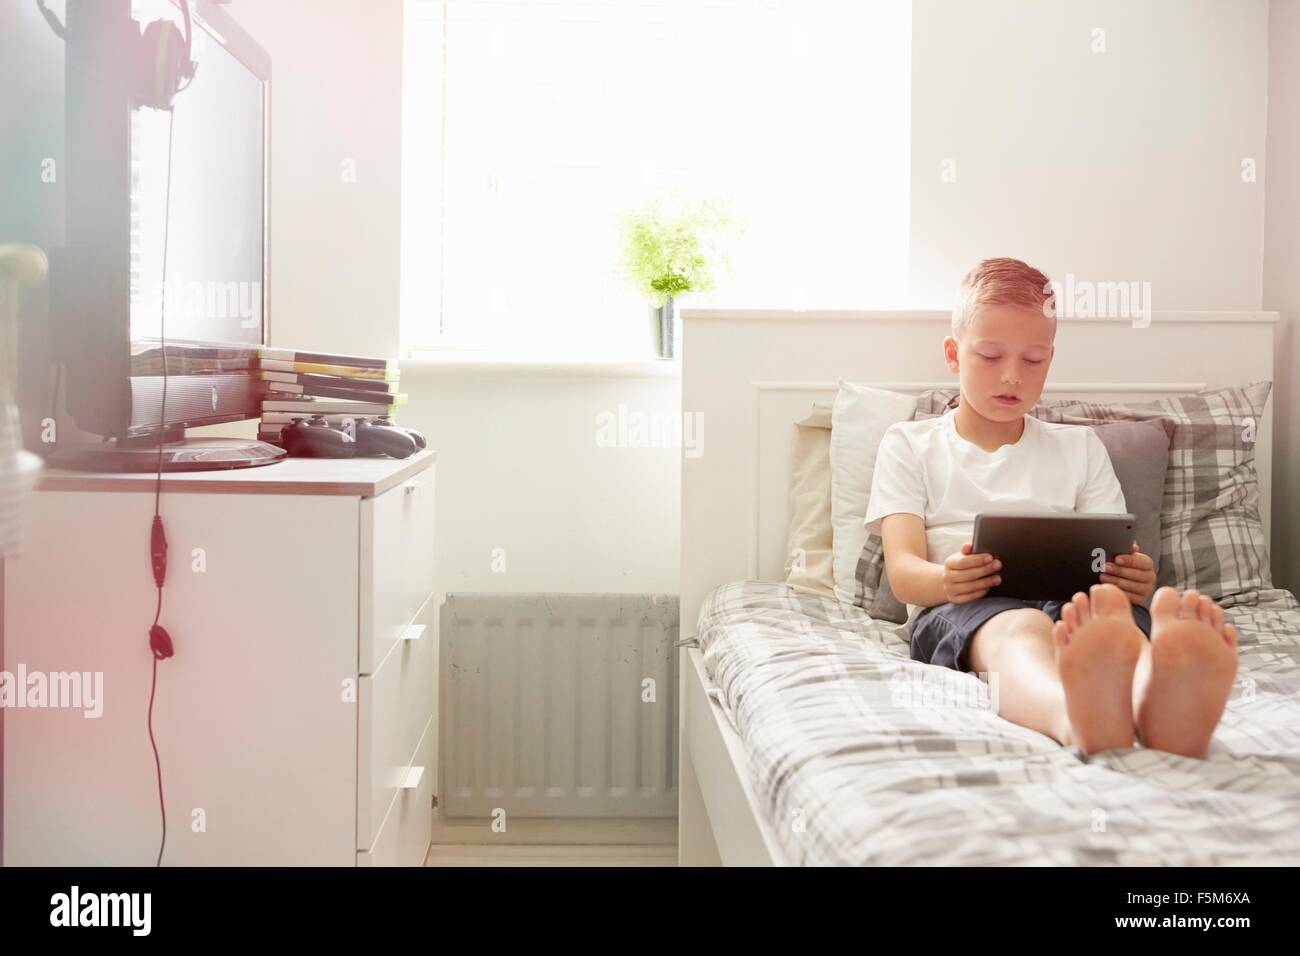 Boy sitting on bed looking down at digital tablet Stock Photo